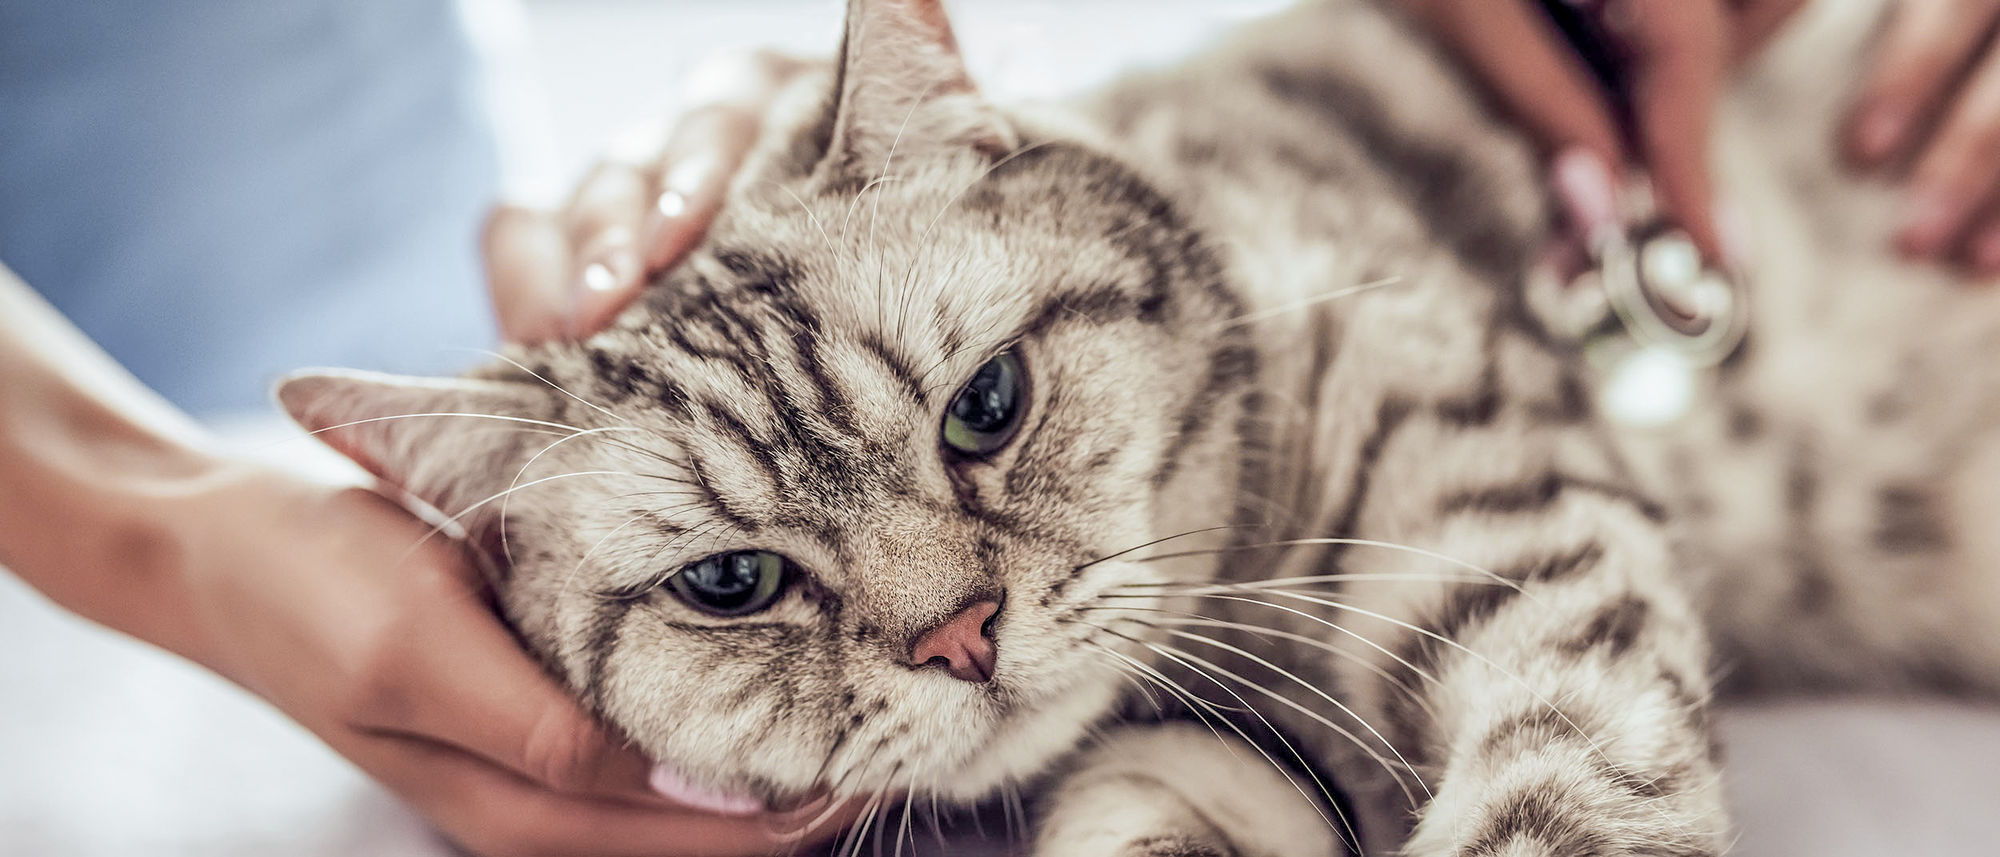 how to treat a cat with urinary issues hero cat